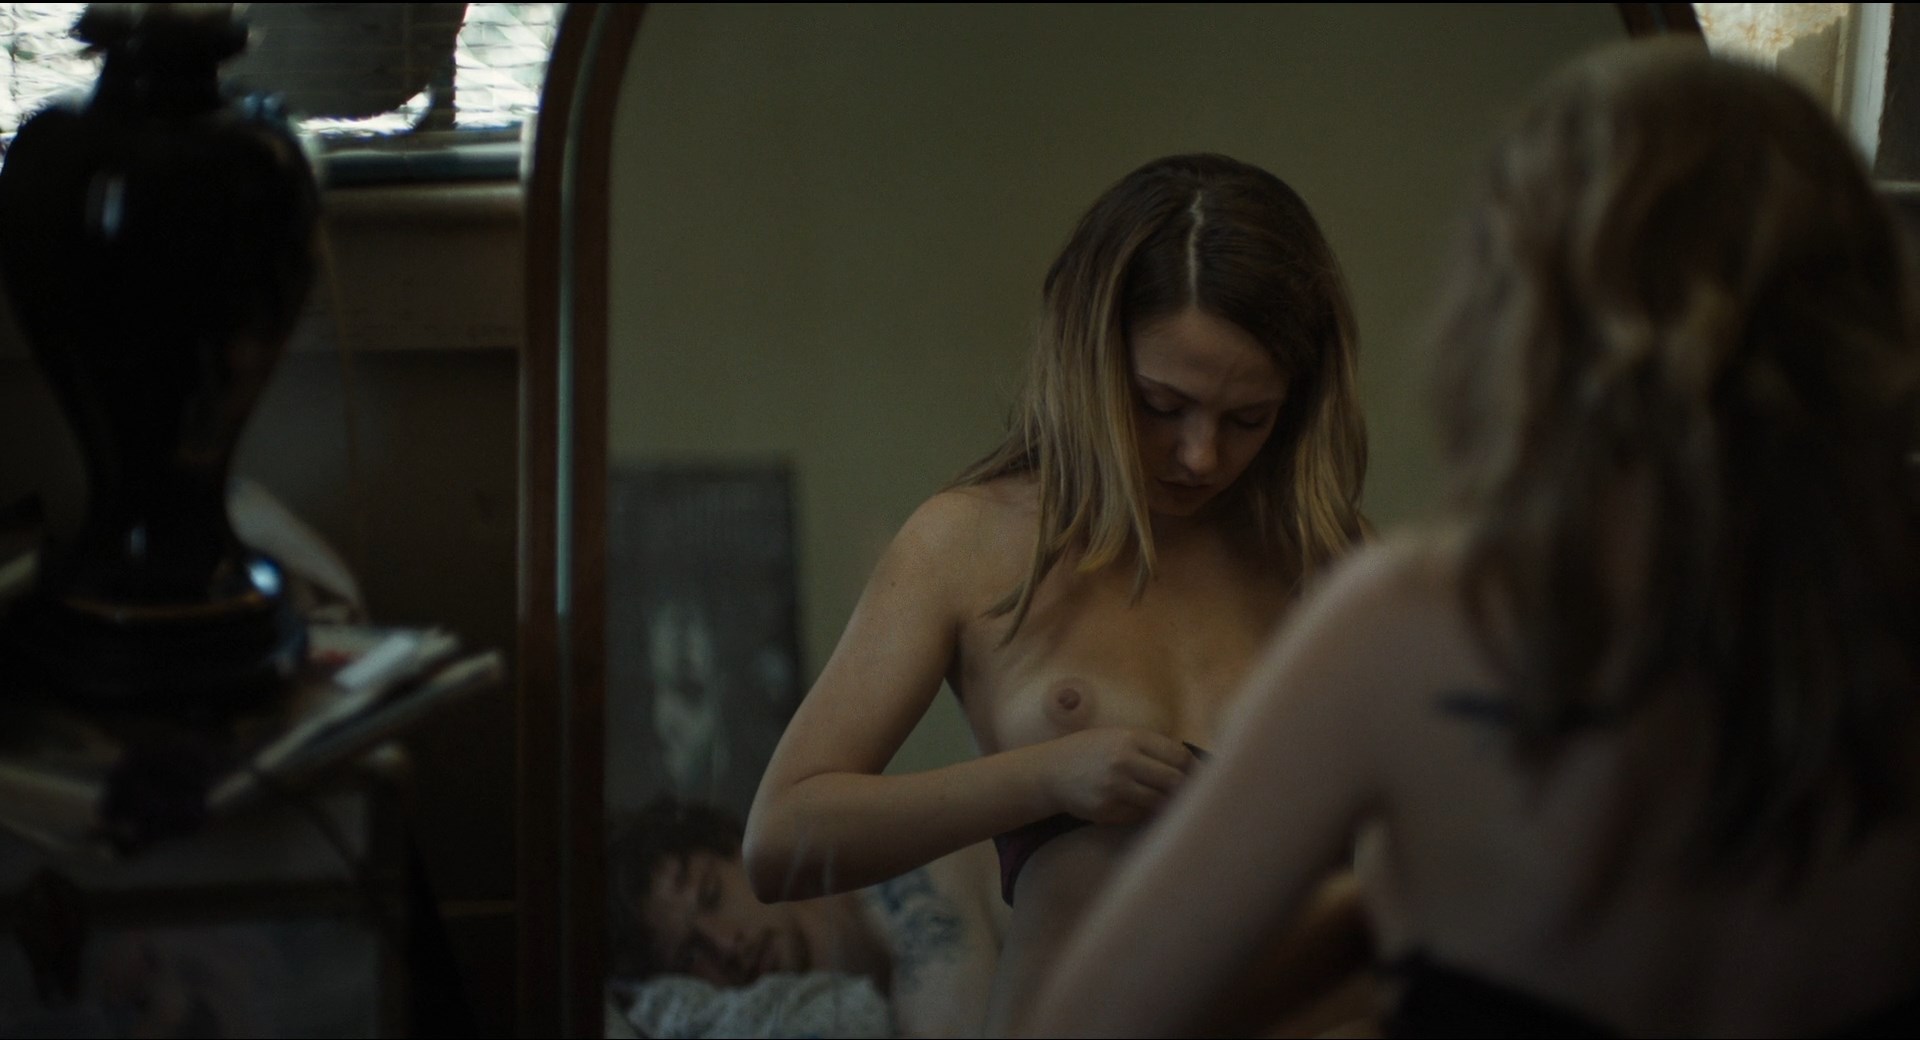 Emily Meade shows her tits while putting on a bra.